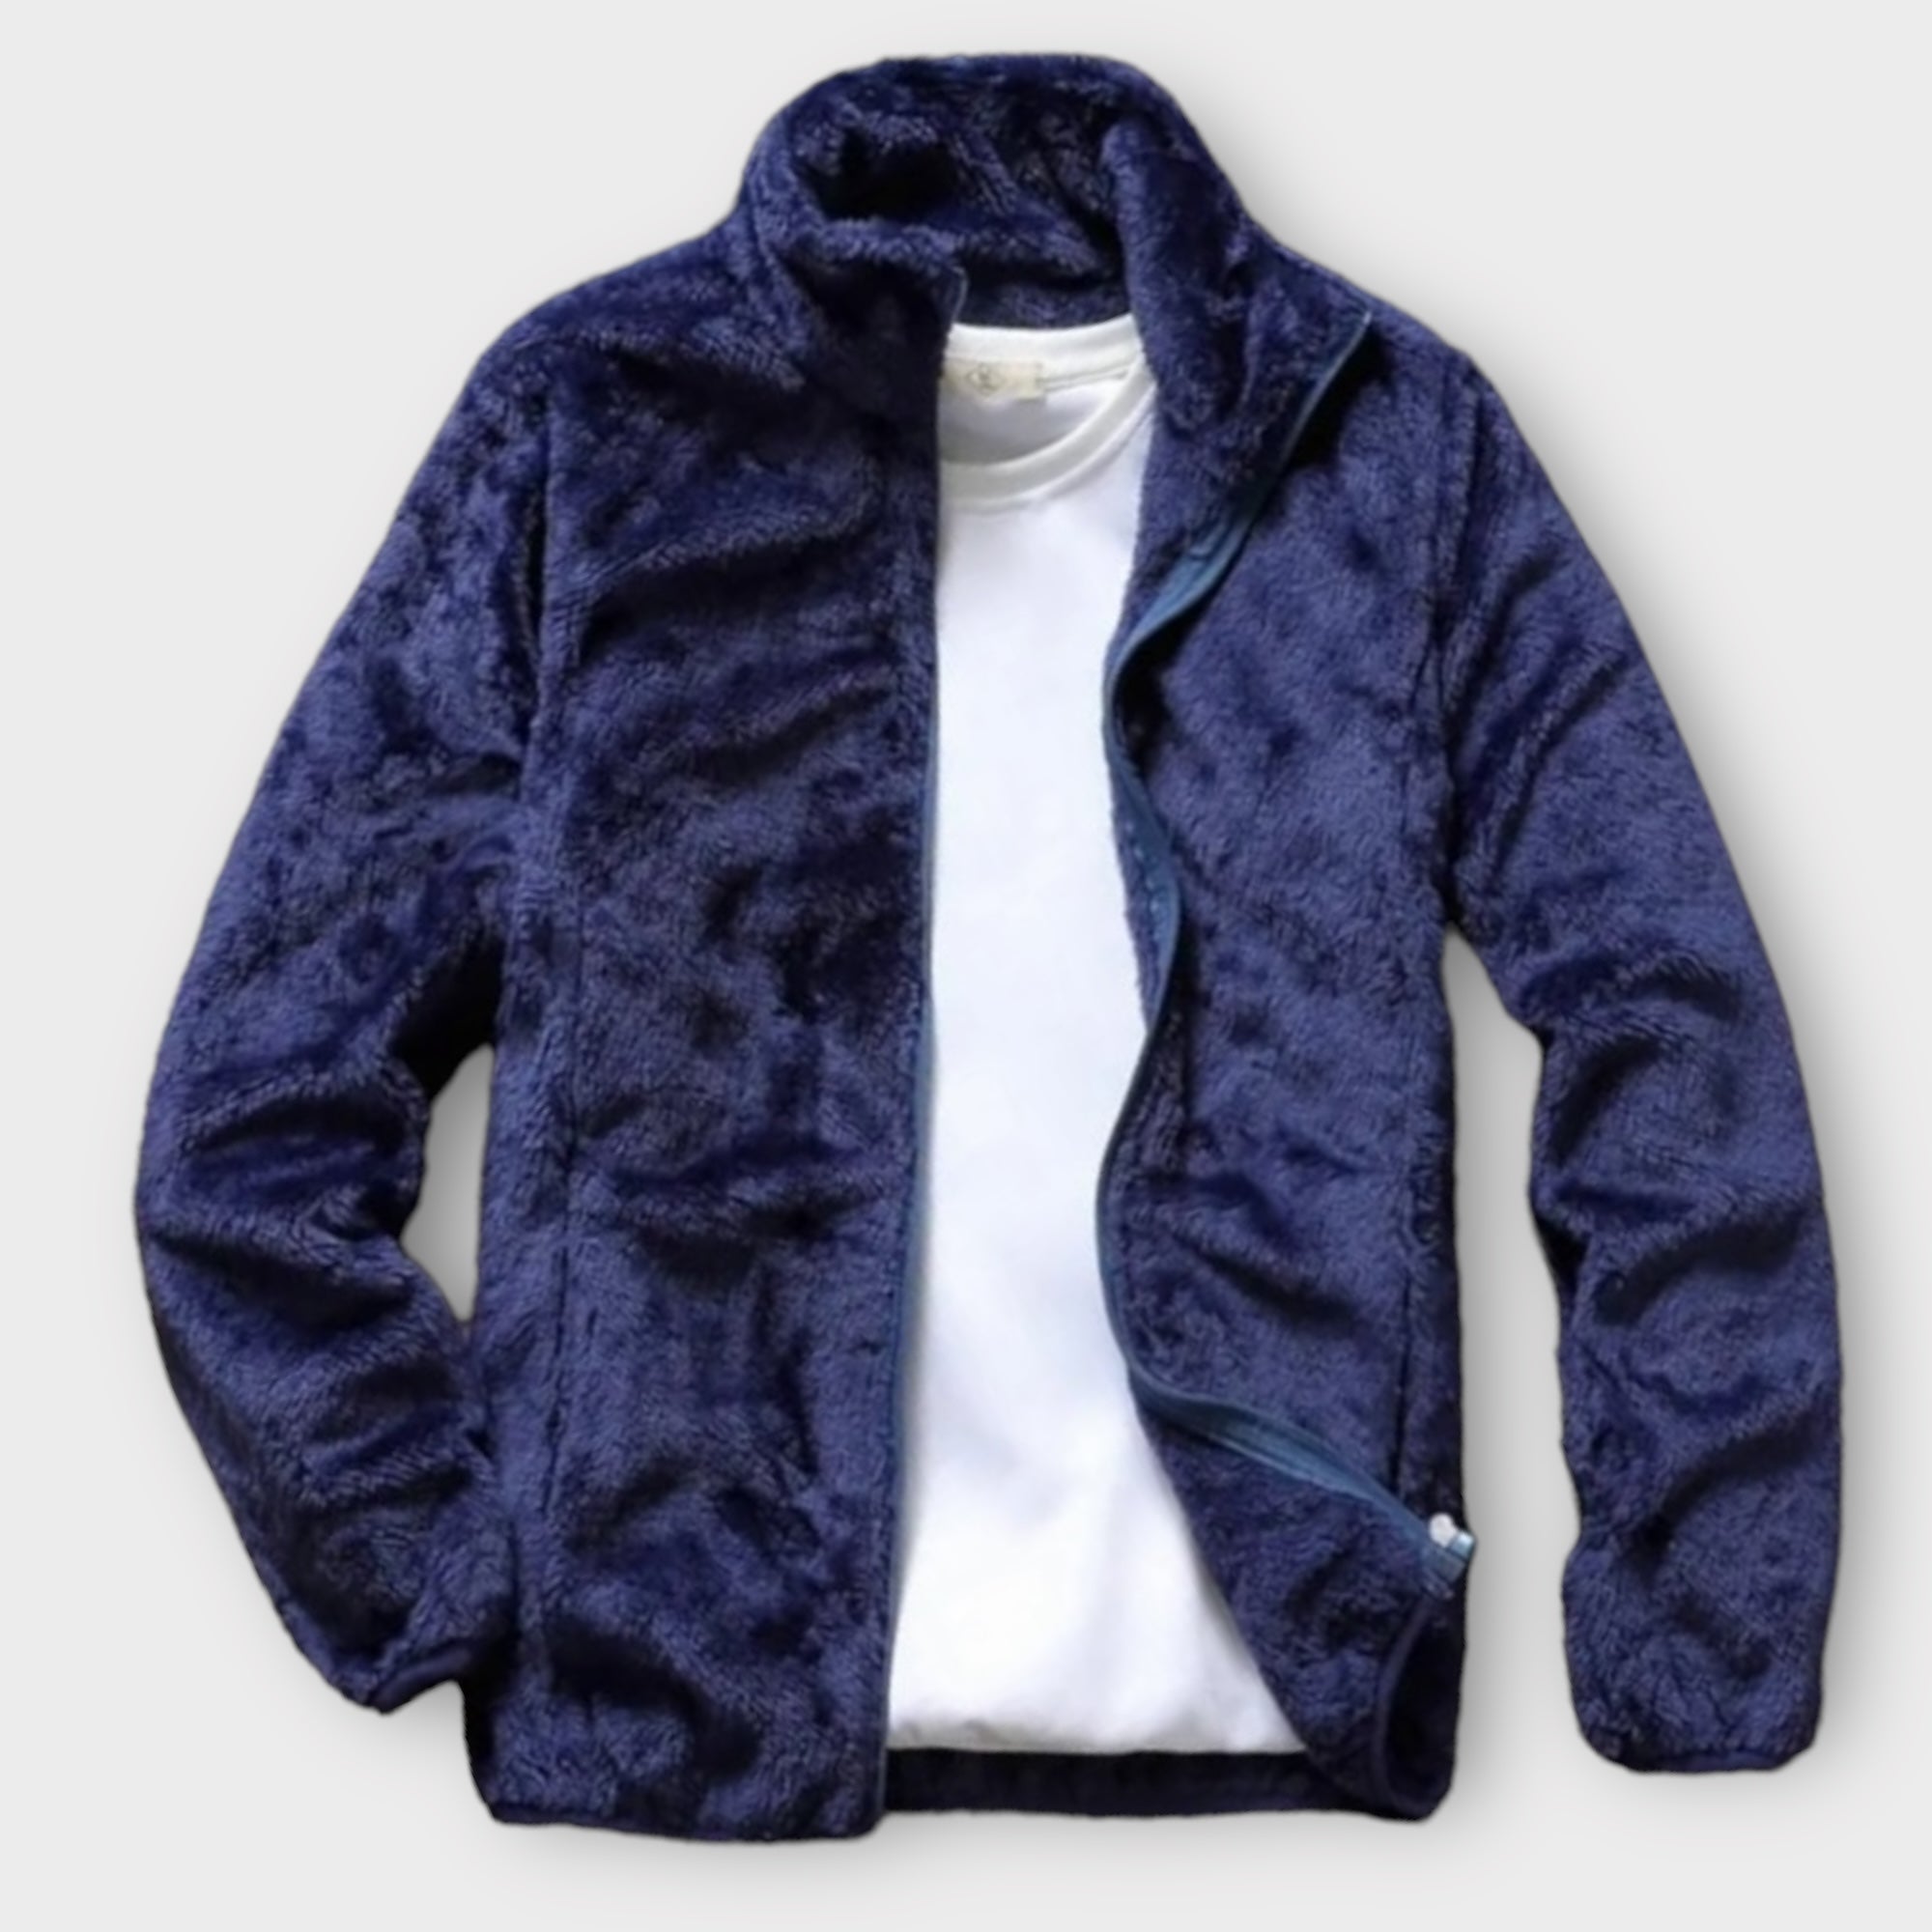 'OICO' A fashionable solid color fluffy coat for men